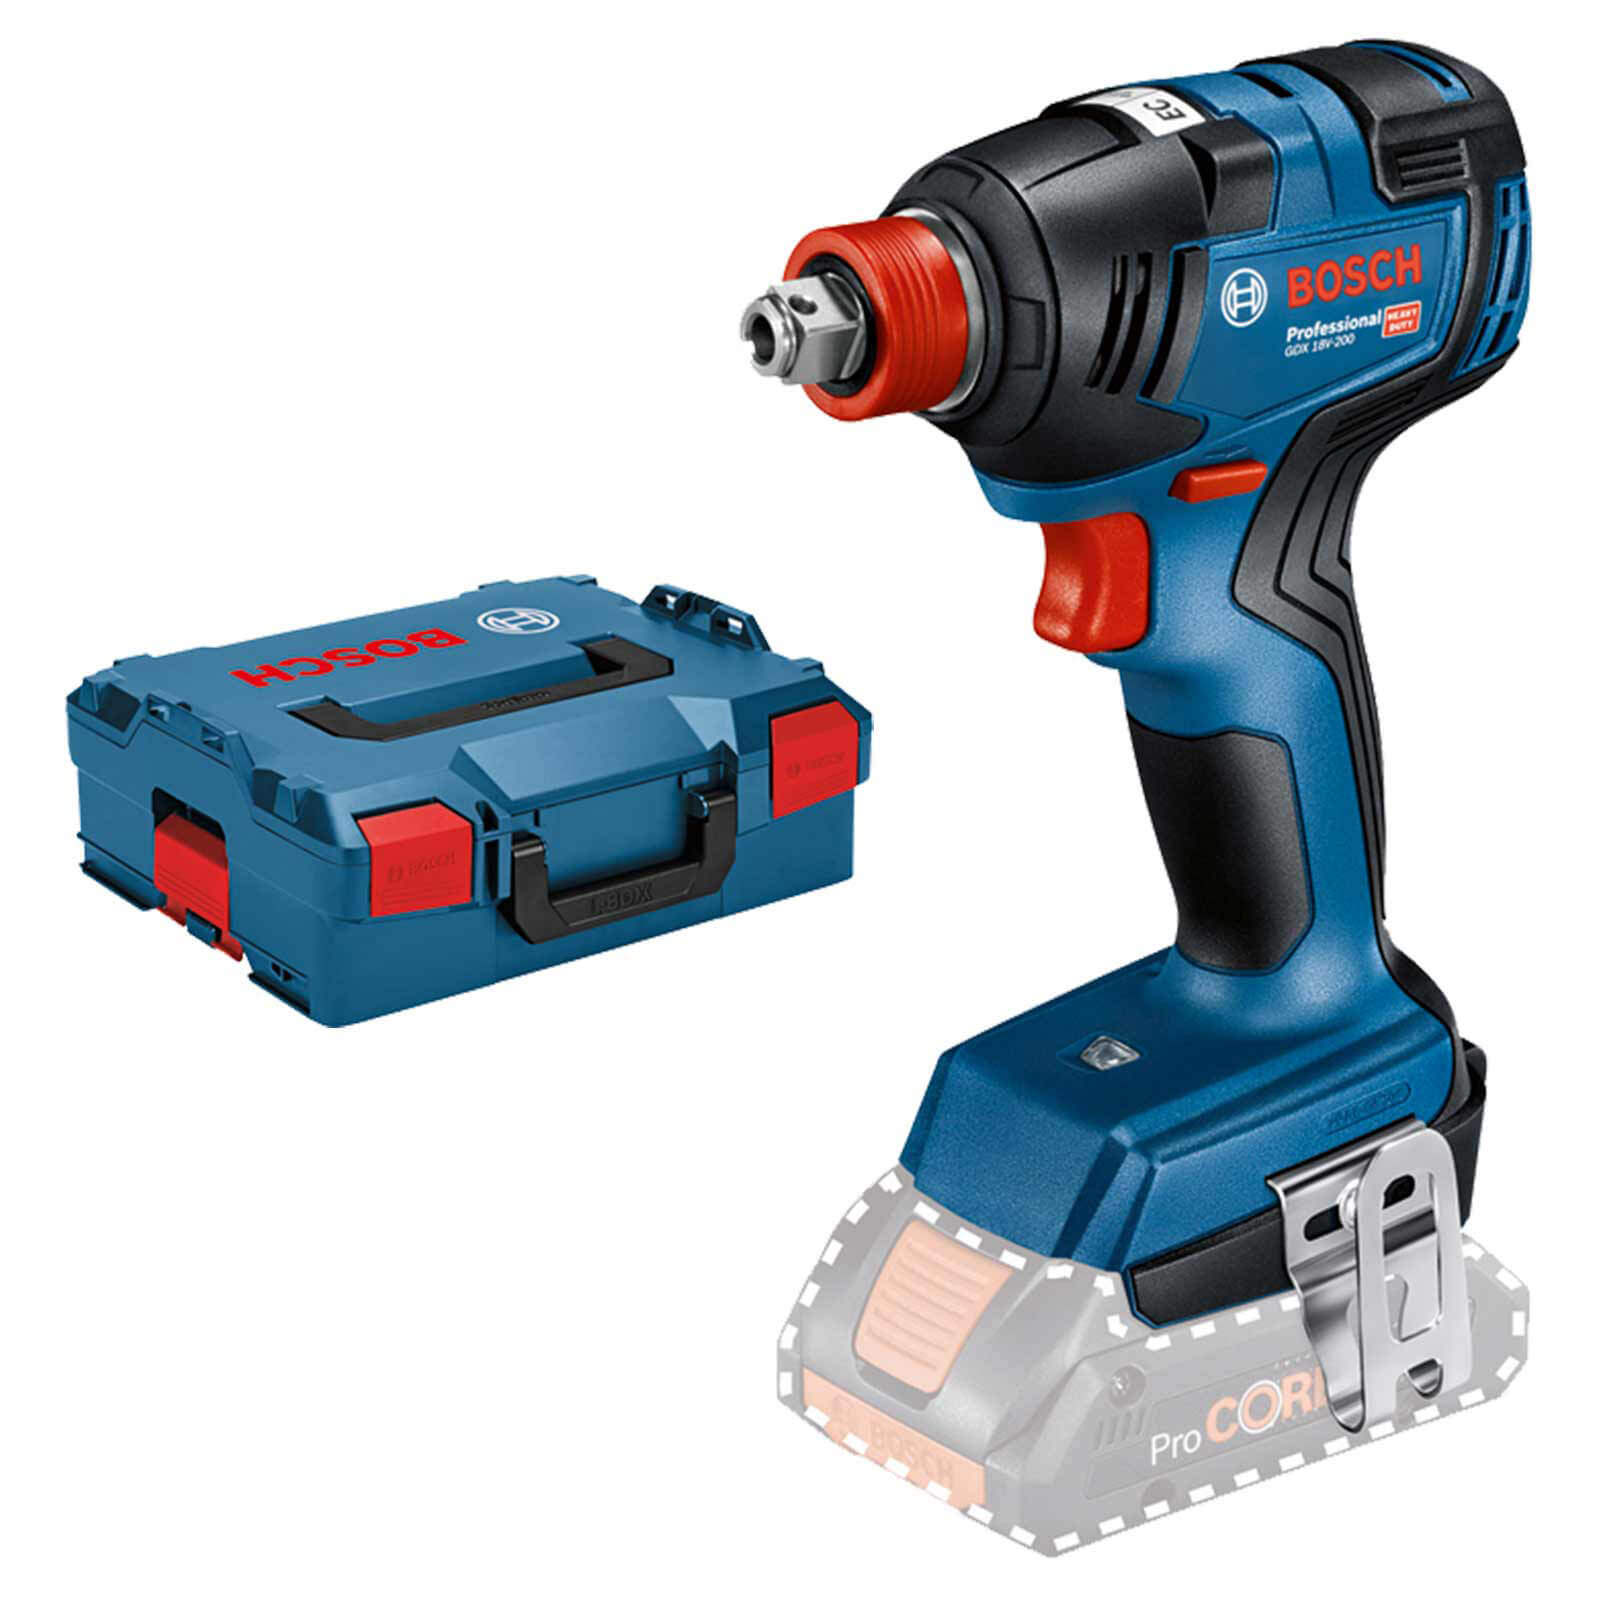 Photo of Bosch Gdx 18v-200 18v Cordless Brushless Impact Driver / Wrench No Batteries No Charger Case